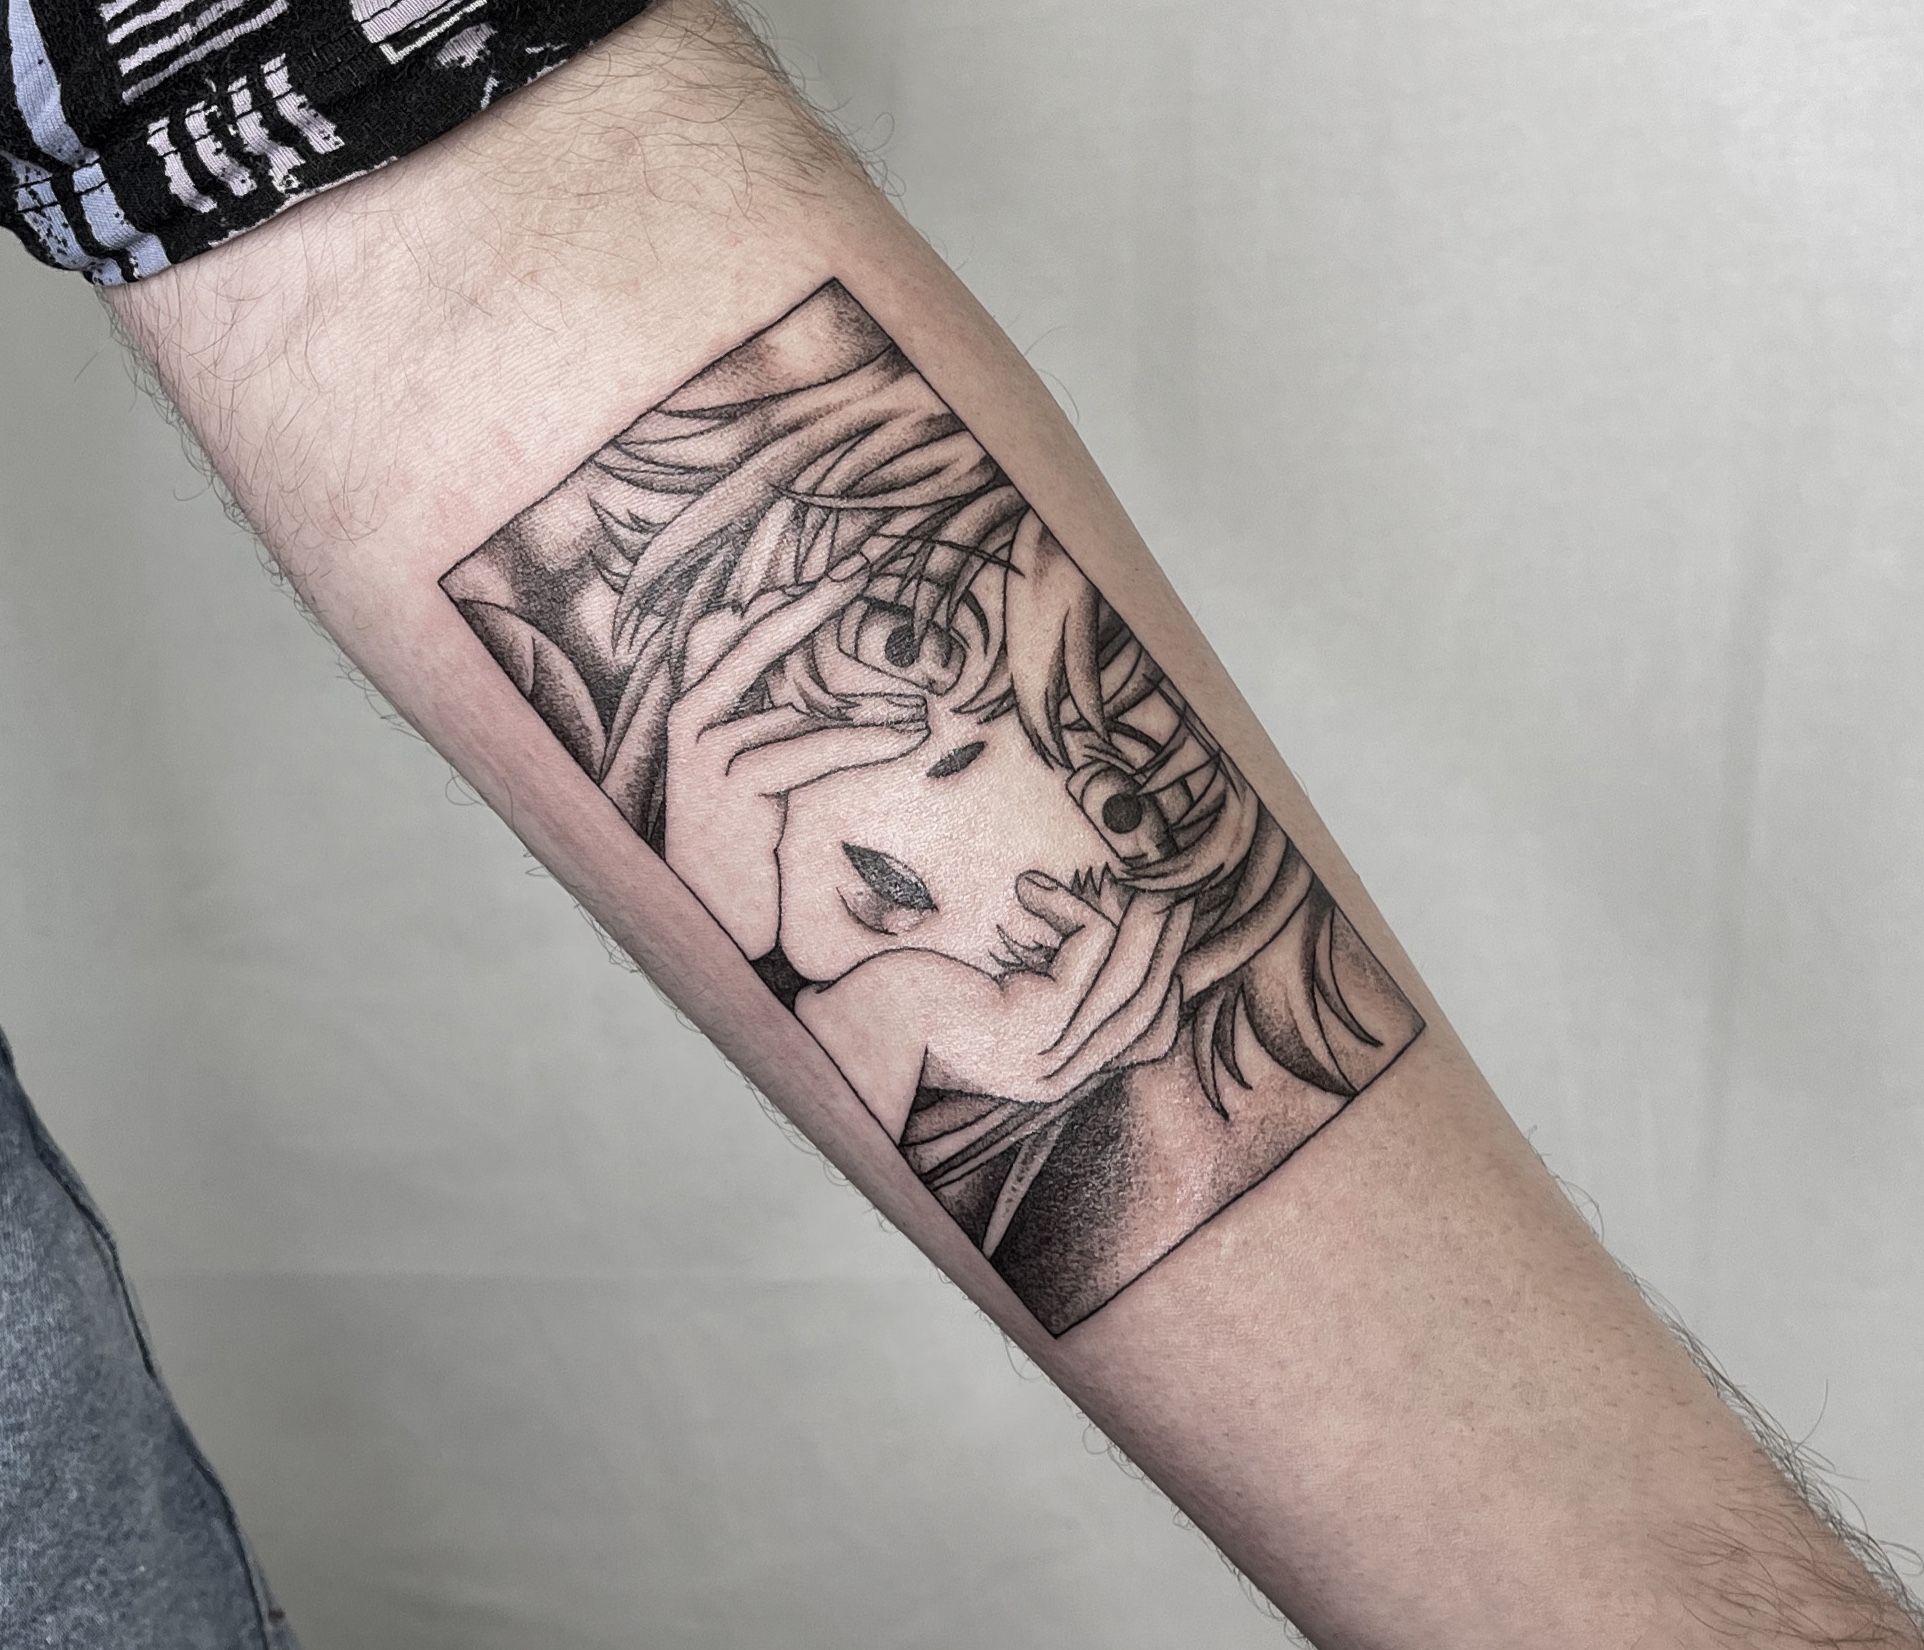 Jessica Maher on Twitter Cant help but feel proud and gush about my dear  friends masterful work on my Berserk tattoo  Ive been staring at my  leg for days he really